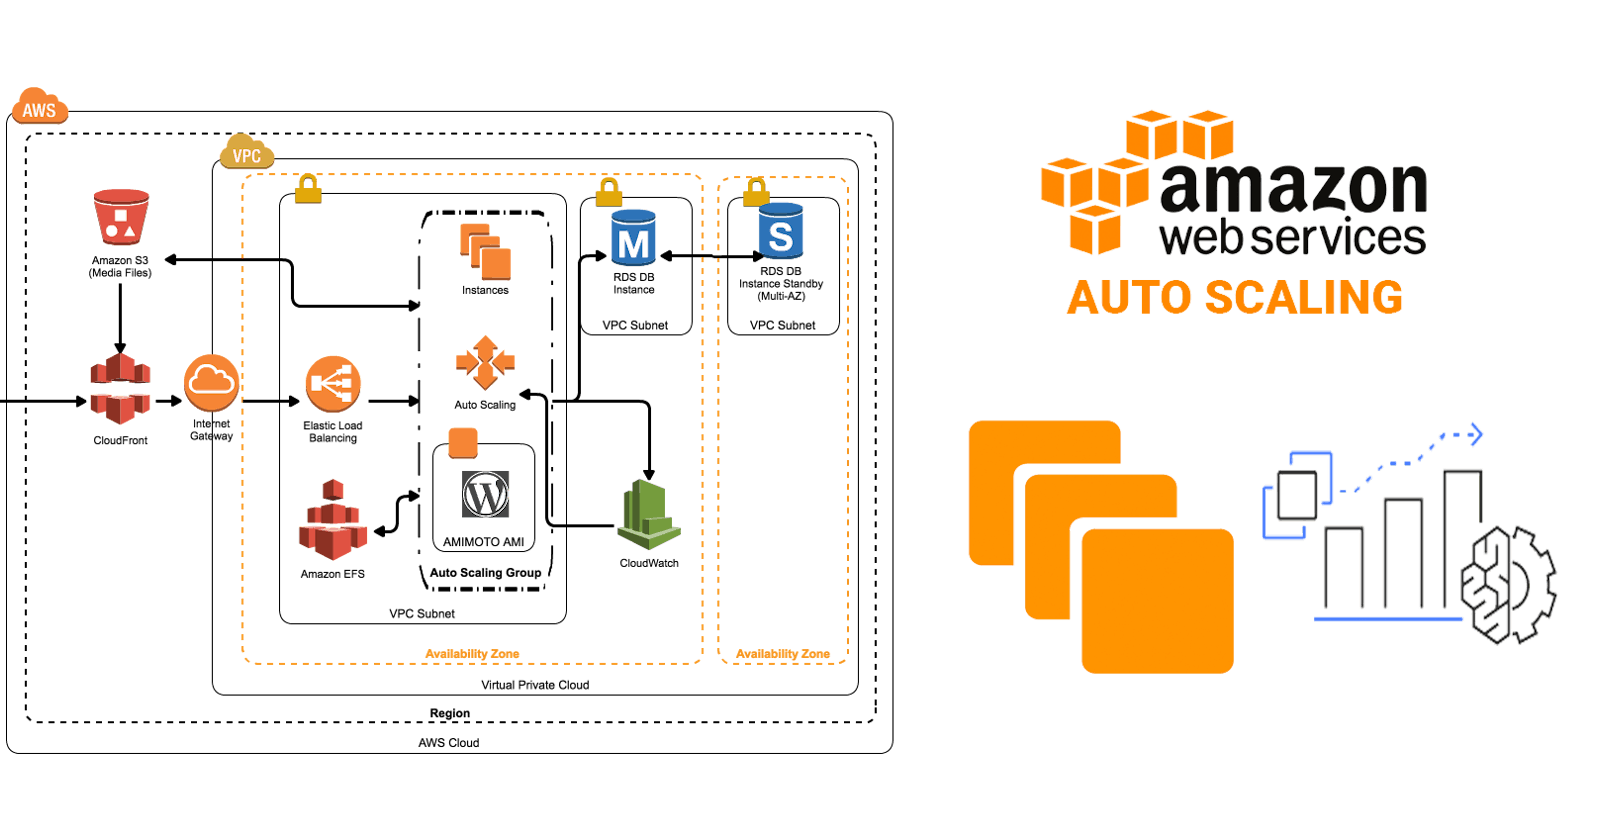 AWS EC2 and Auto Scaling: Deploying and Monitoring Web Applications